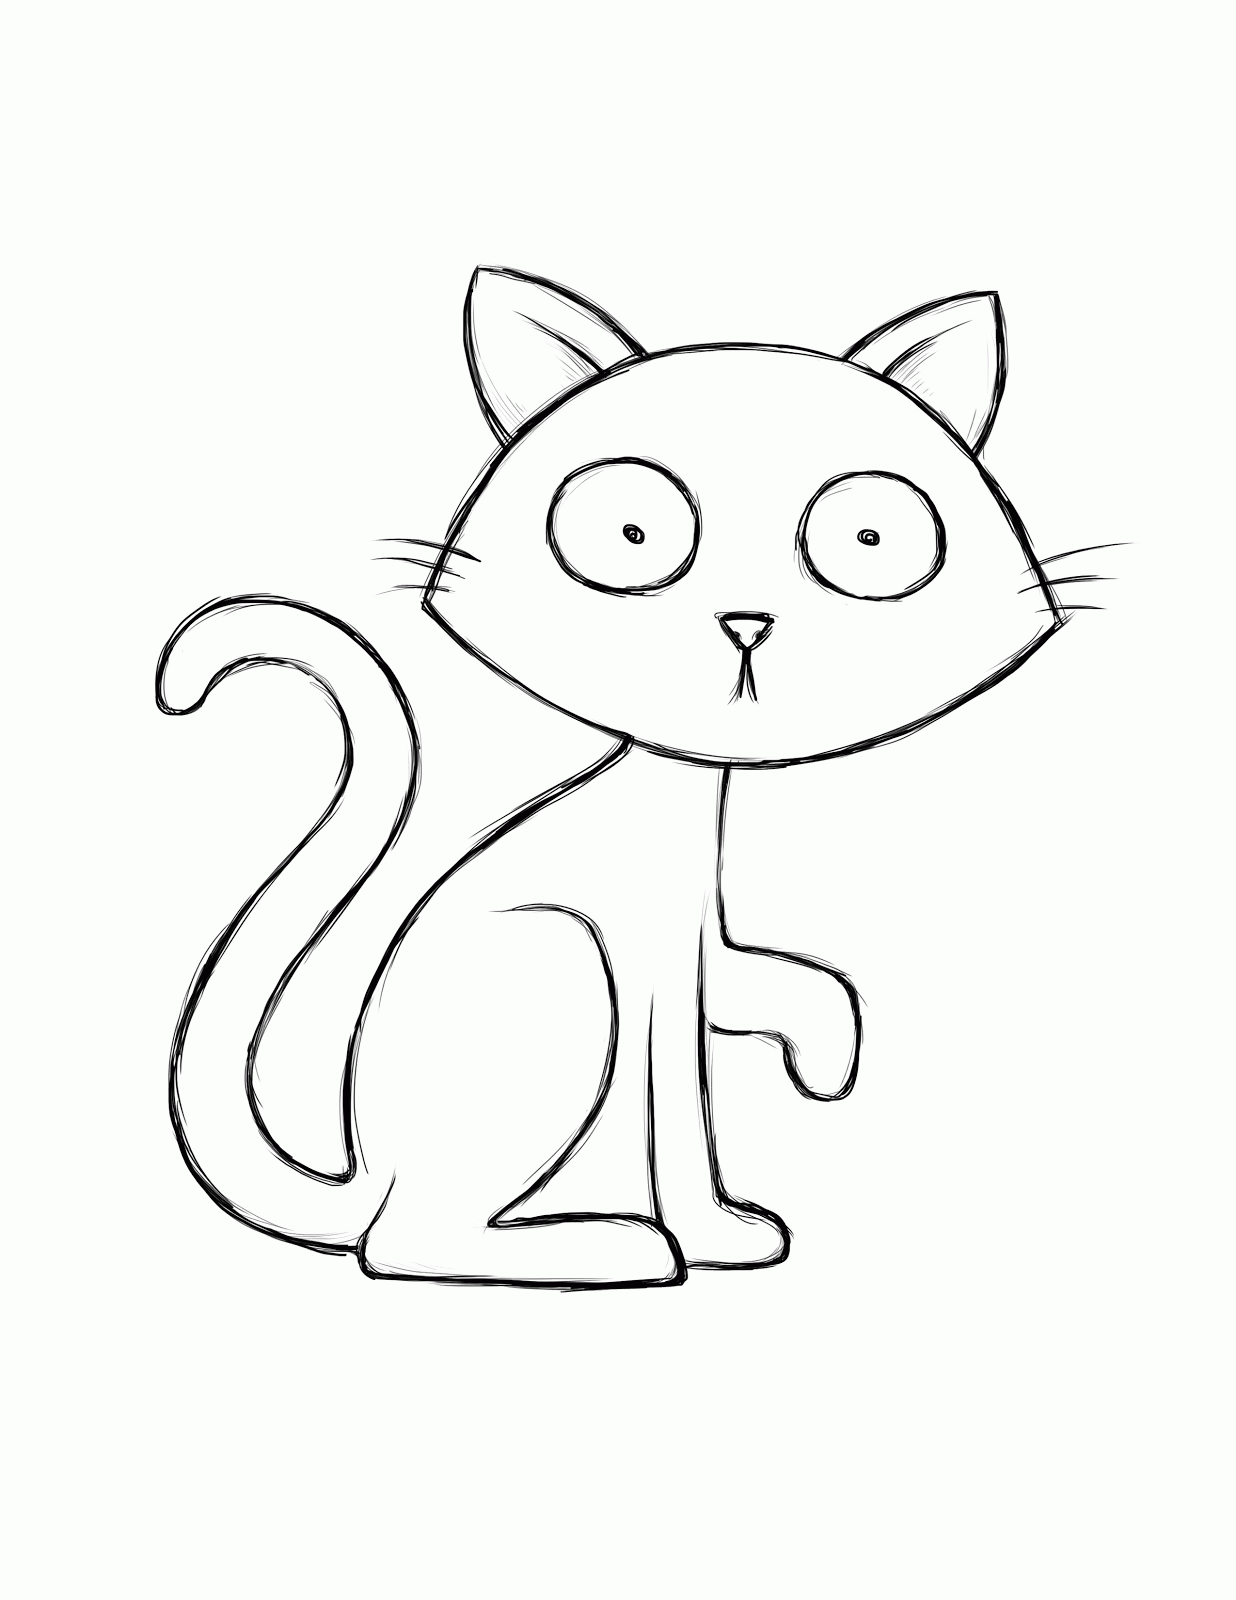 Download Pete The Cat Halloween Coloring Page - Coloring Home